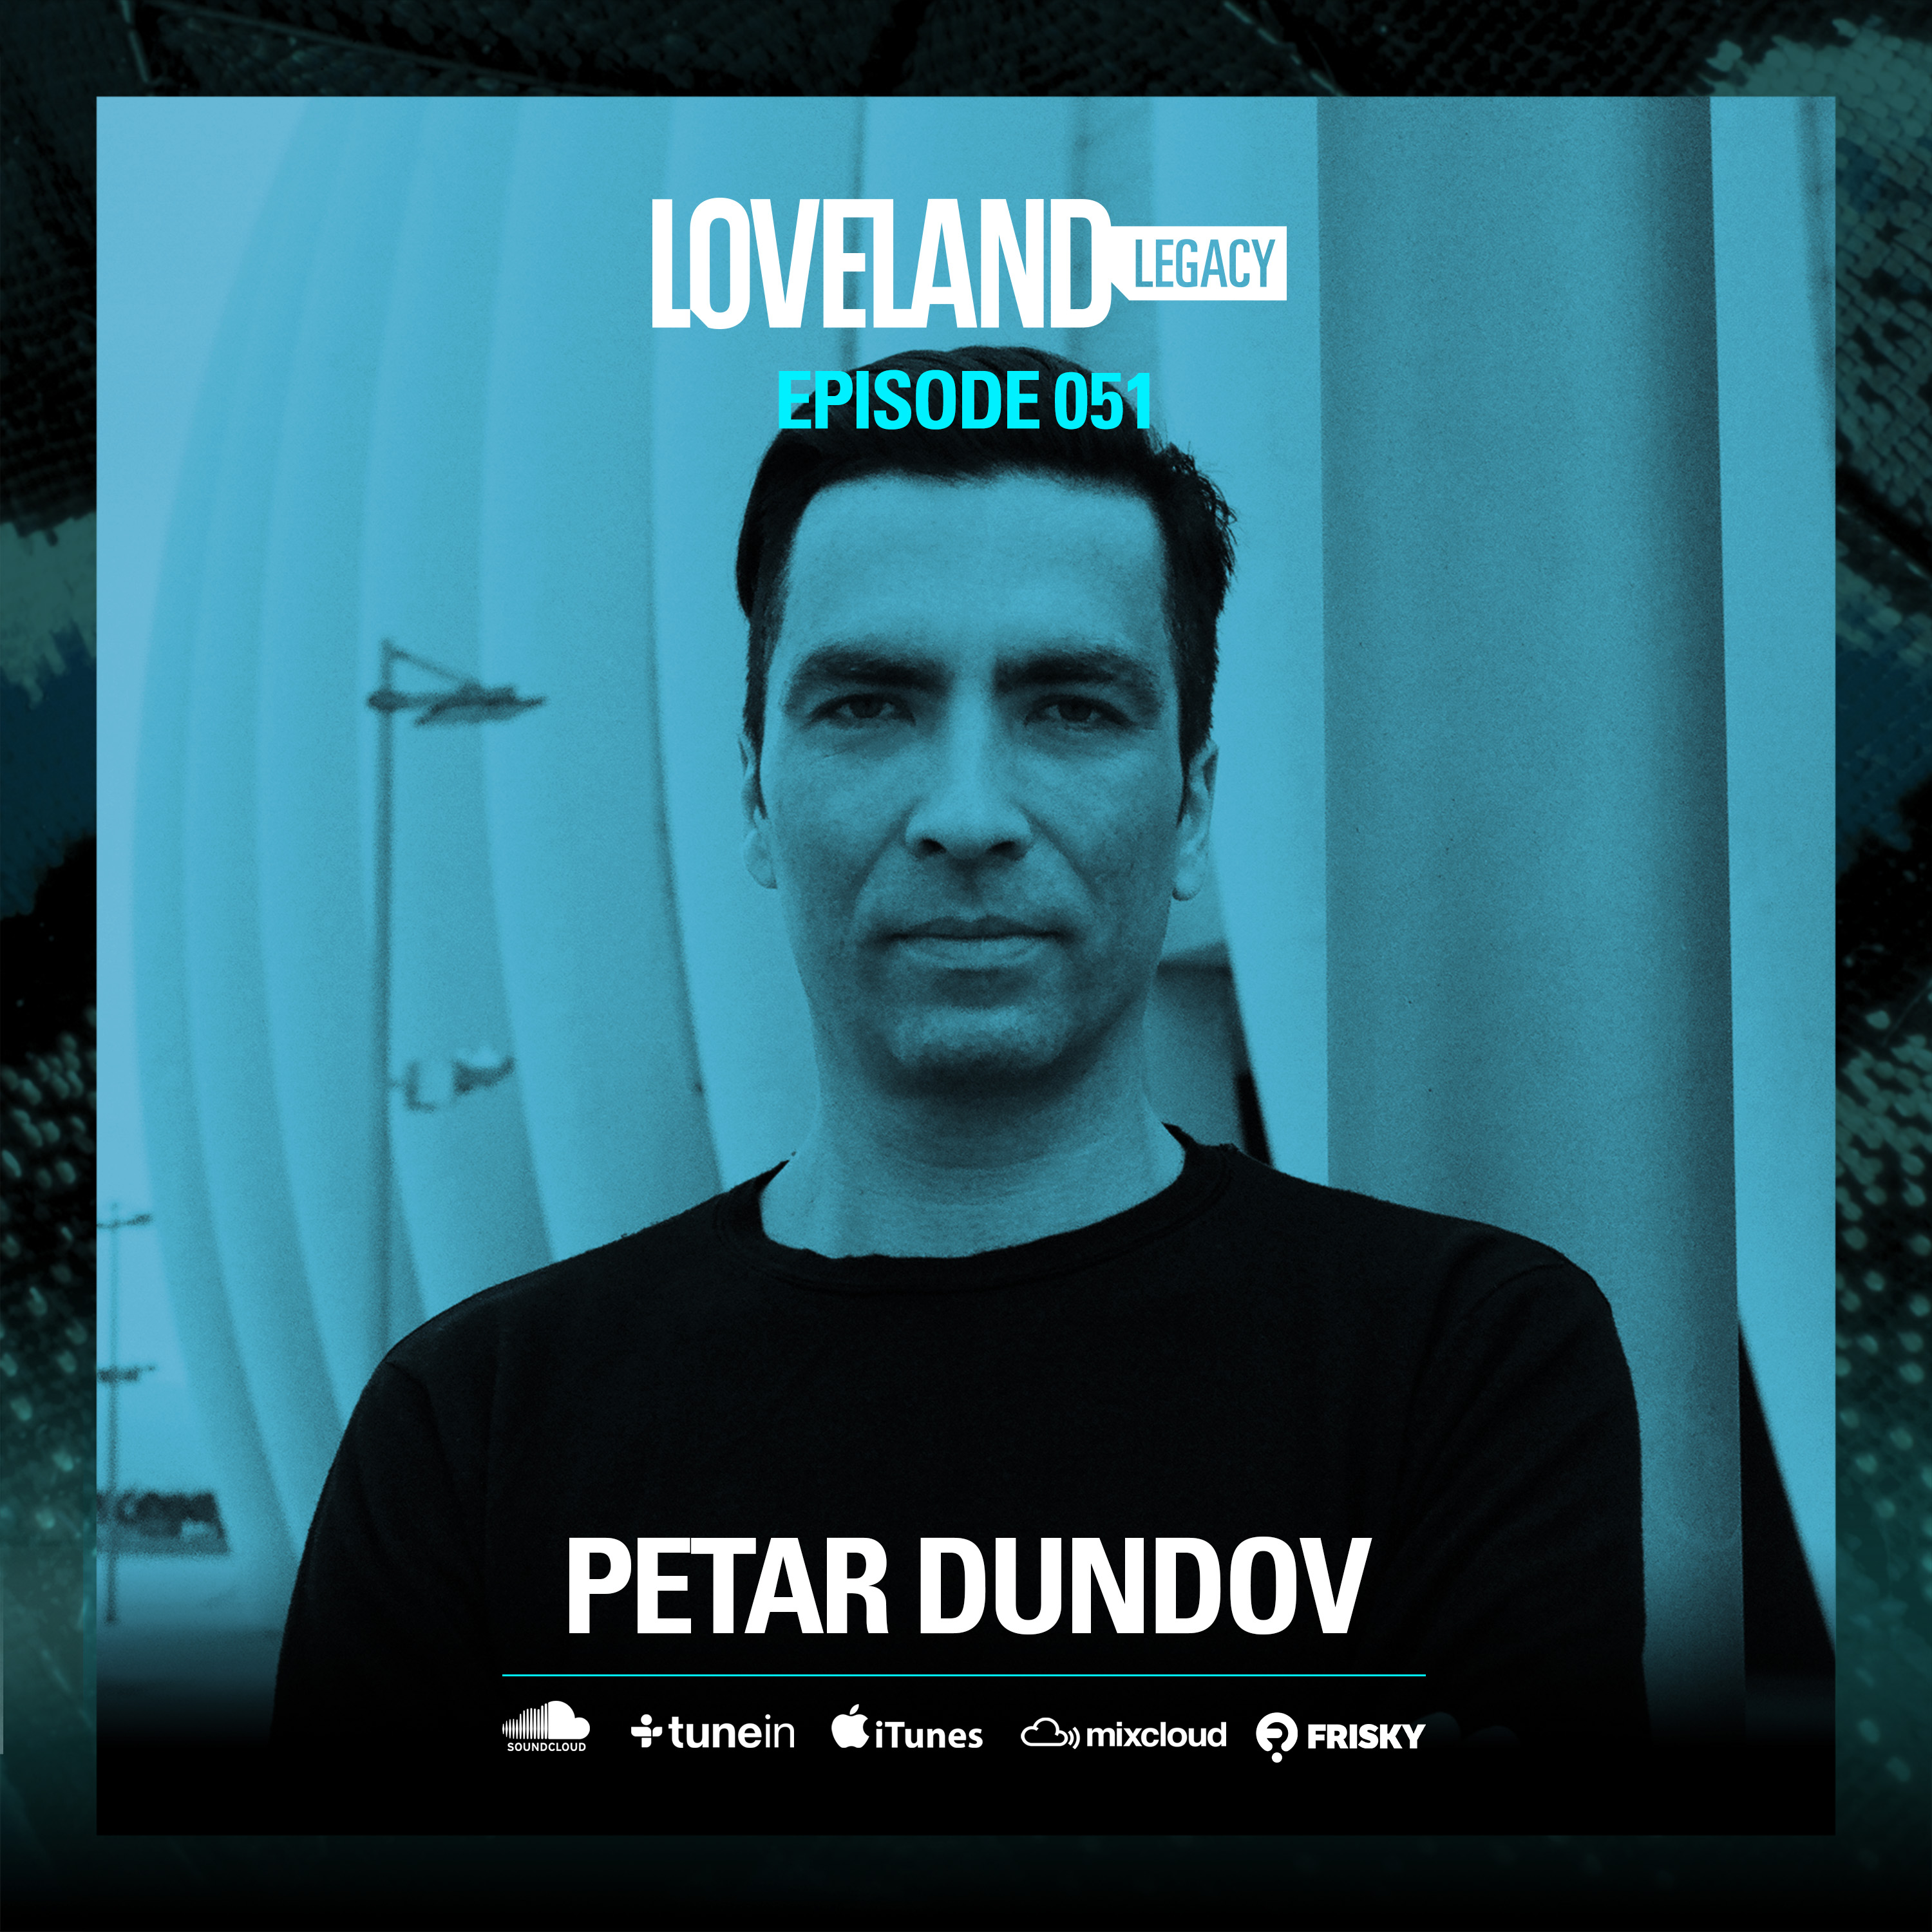 In 2014 Petar Dundov joined us at Cocoon | Break New Soil at Loveland ADE for what would be a magnificent performance. He is back to join us January 1st at Loveland Live 2017. The Croatian maestro's three-track EP Falling In was released November 25th on Loveland Recordings. Buy: bit.ly/Buy_PetarDundovFallingInEP Listen: soundcloud.com/loveland-recordings/sets/preview-petar-dundov-falling-in-ep-llr106 See you at: 31/12 Loveland New Year 2016 | bit.ly/LovelandNewYear2016 01/01 Loveland Live 2017 | bit.ly/LovelandLive2017